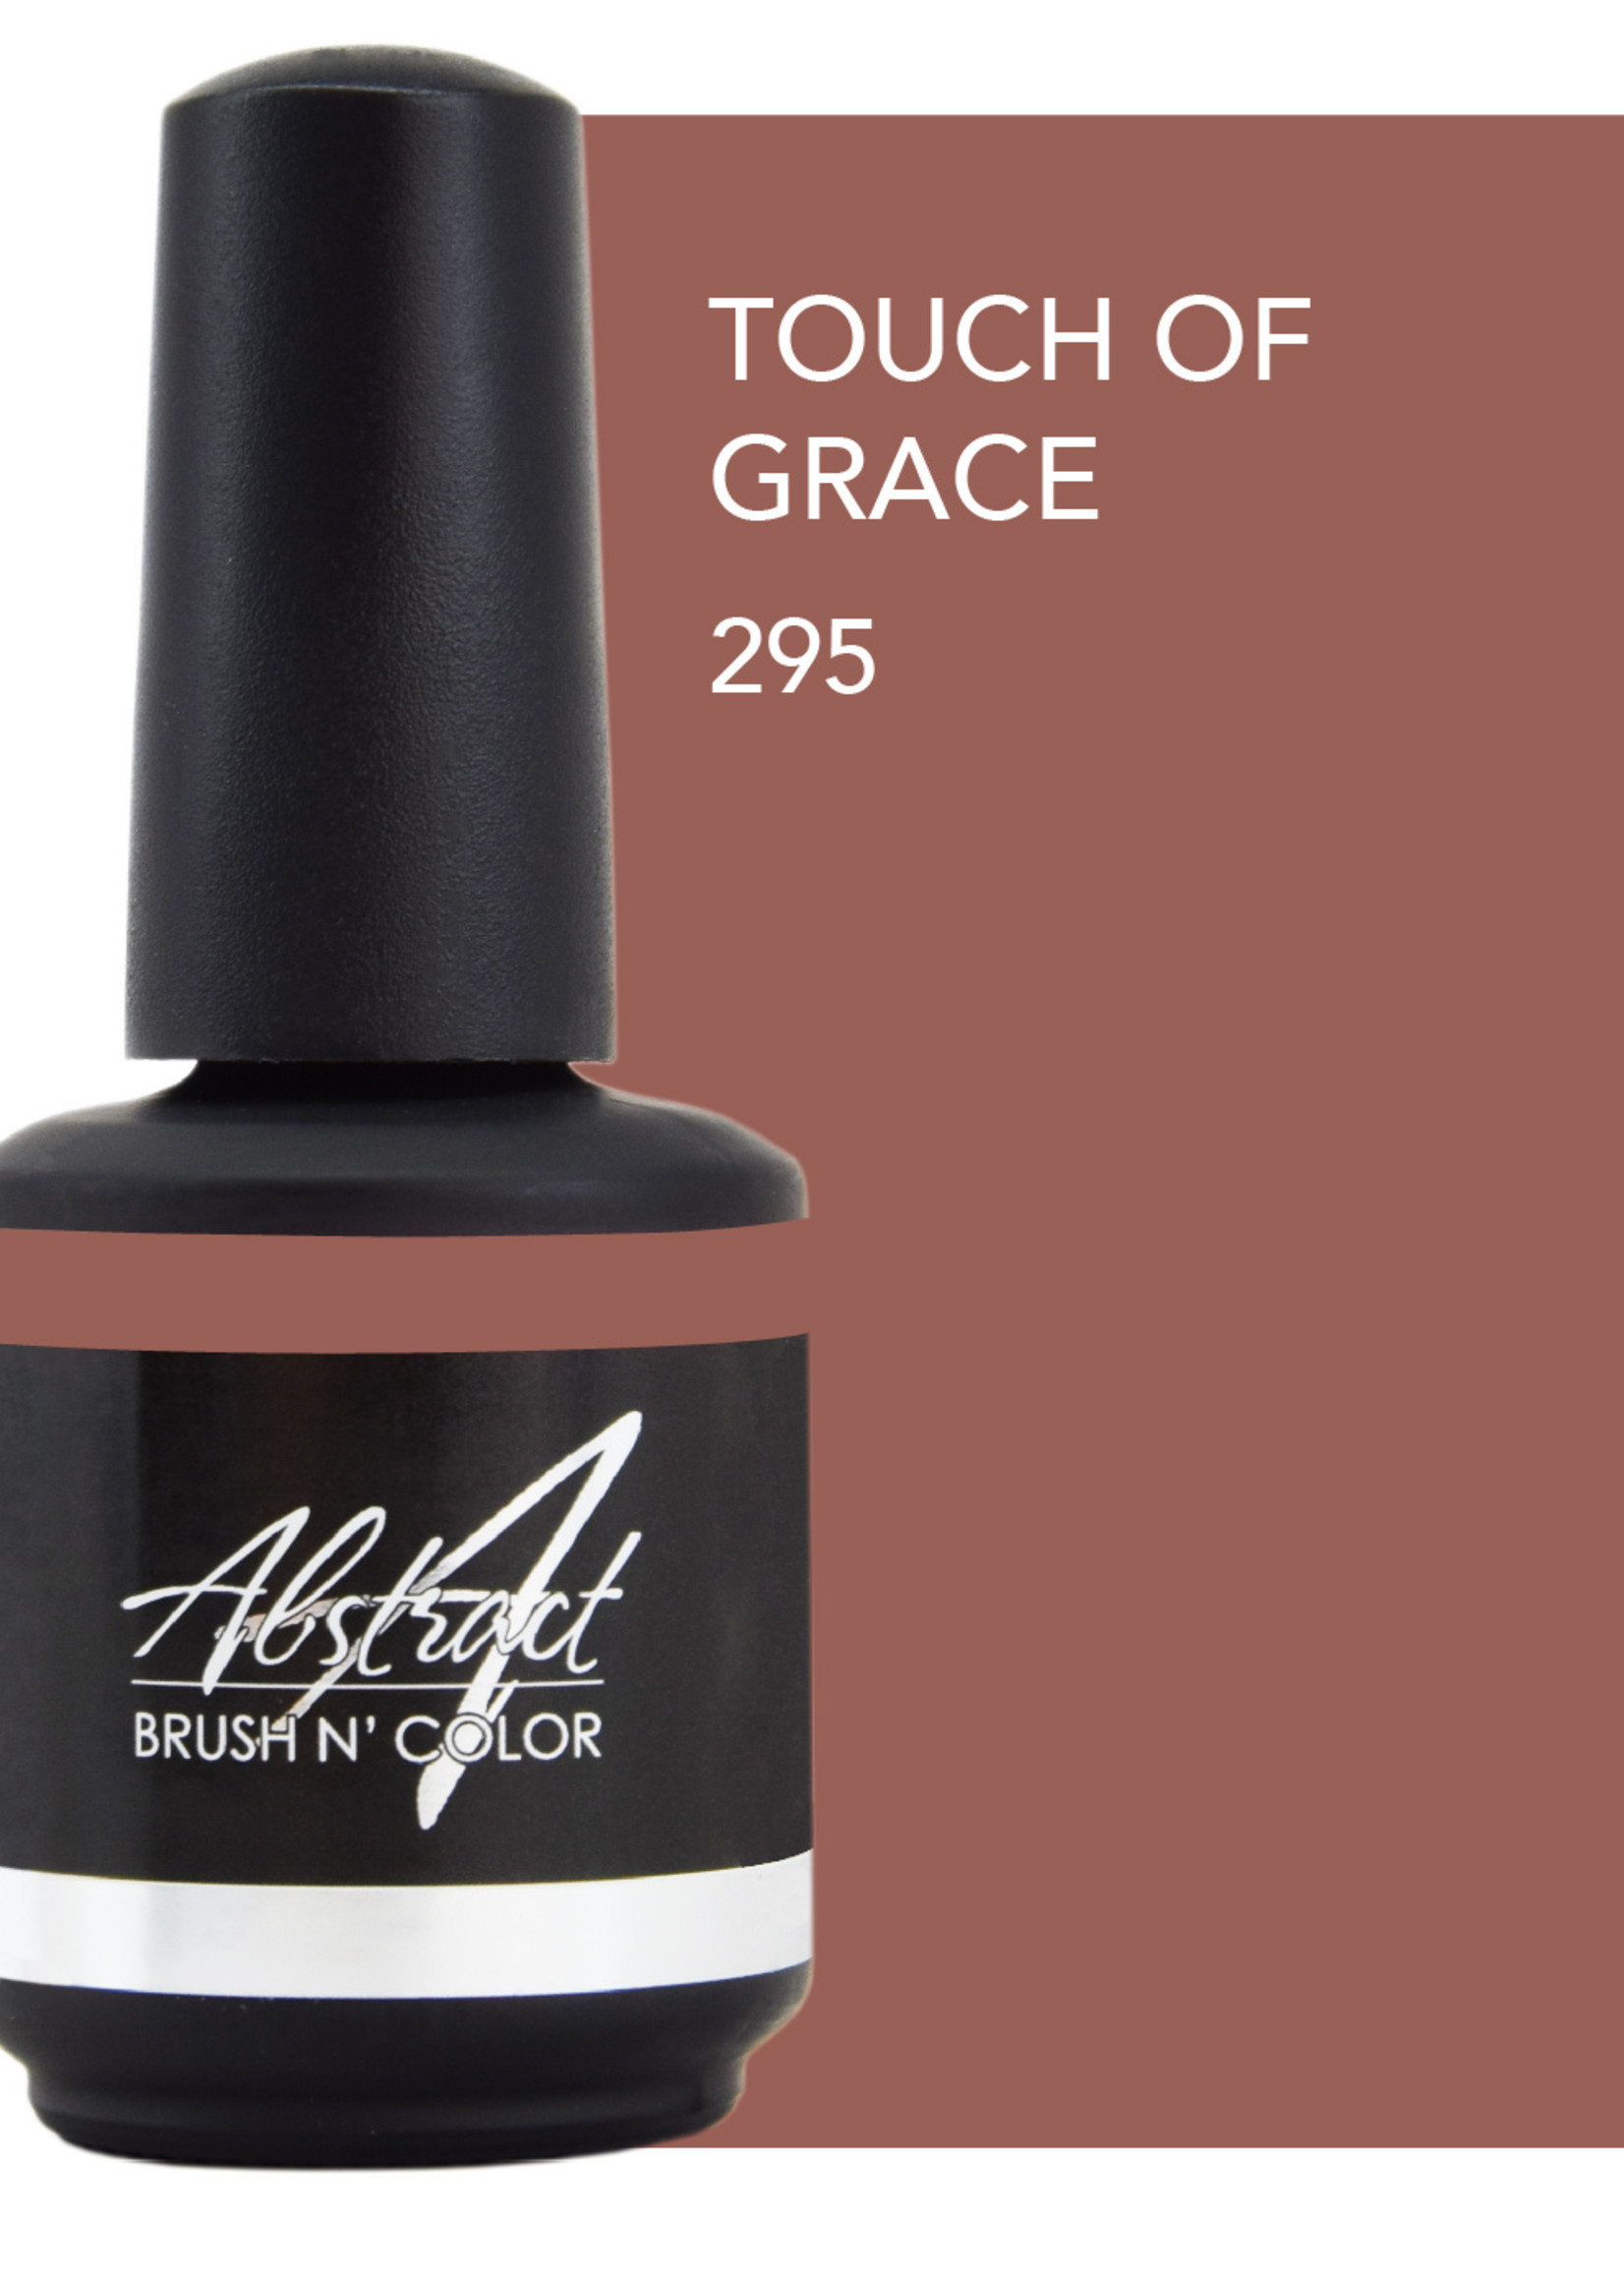 Abstract® Brush N' Color 15 ml Touch Of Grace